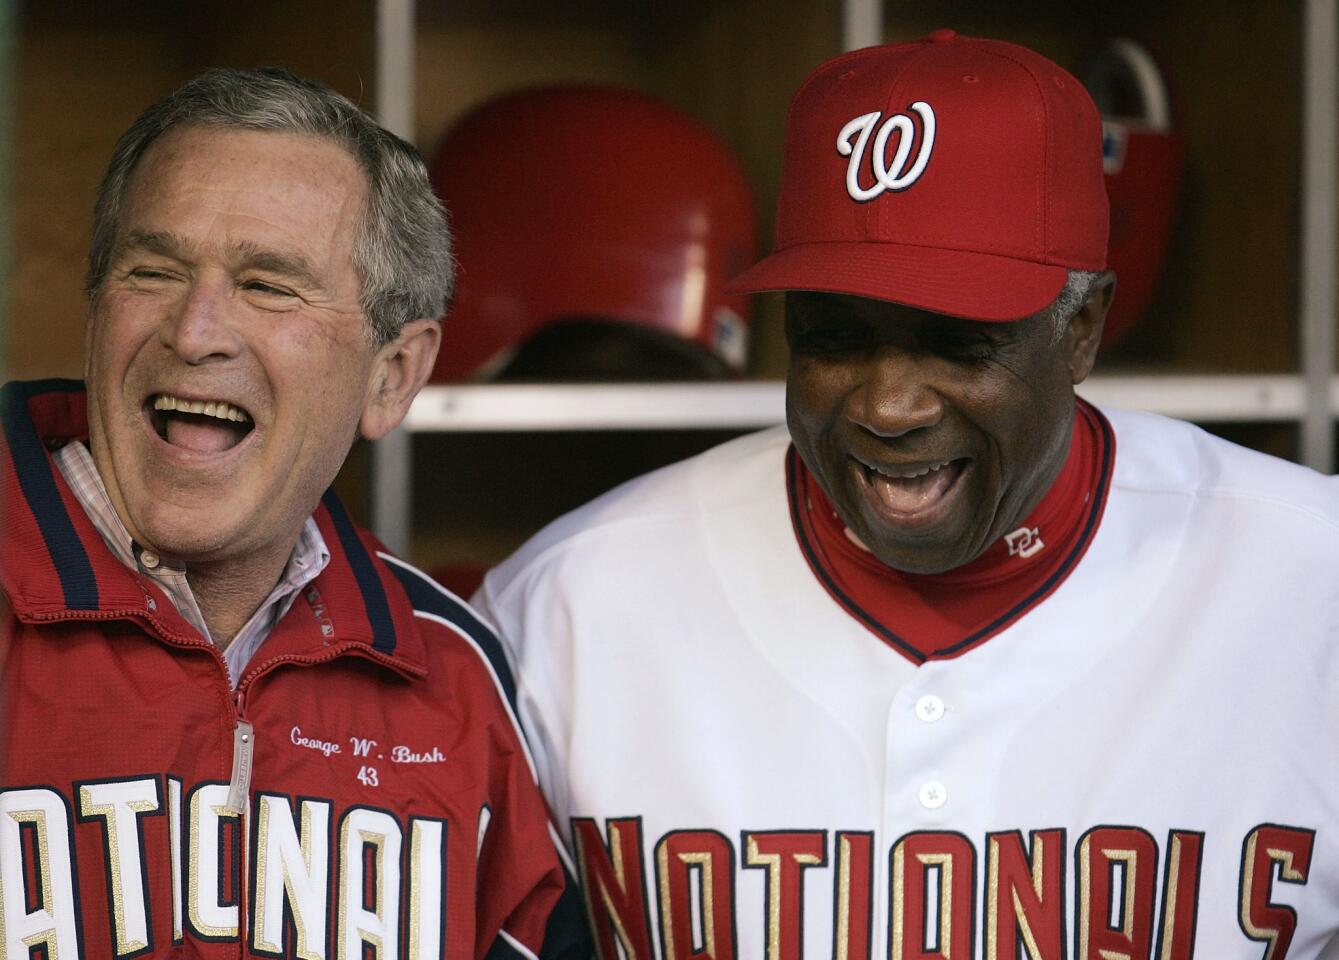 President George W. Bush shares a laugh with Nationals manager Frank Robinson before throwing out the first pitch at the Washington Nationals' home opener against the Arizona Diamondbacks at RFK Stadium on April 14, 2005, in Washington.